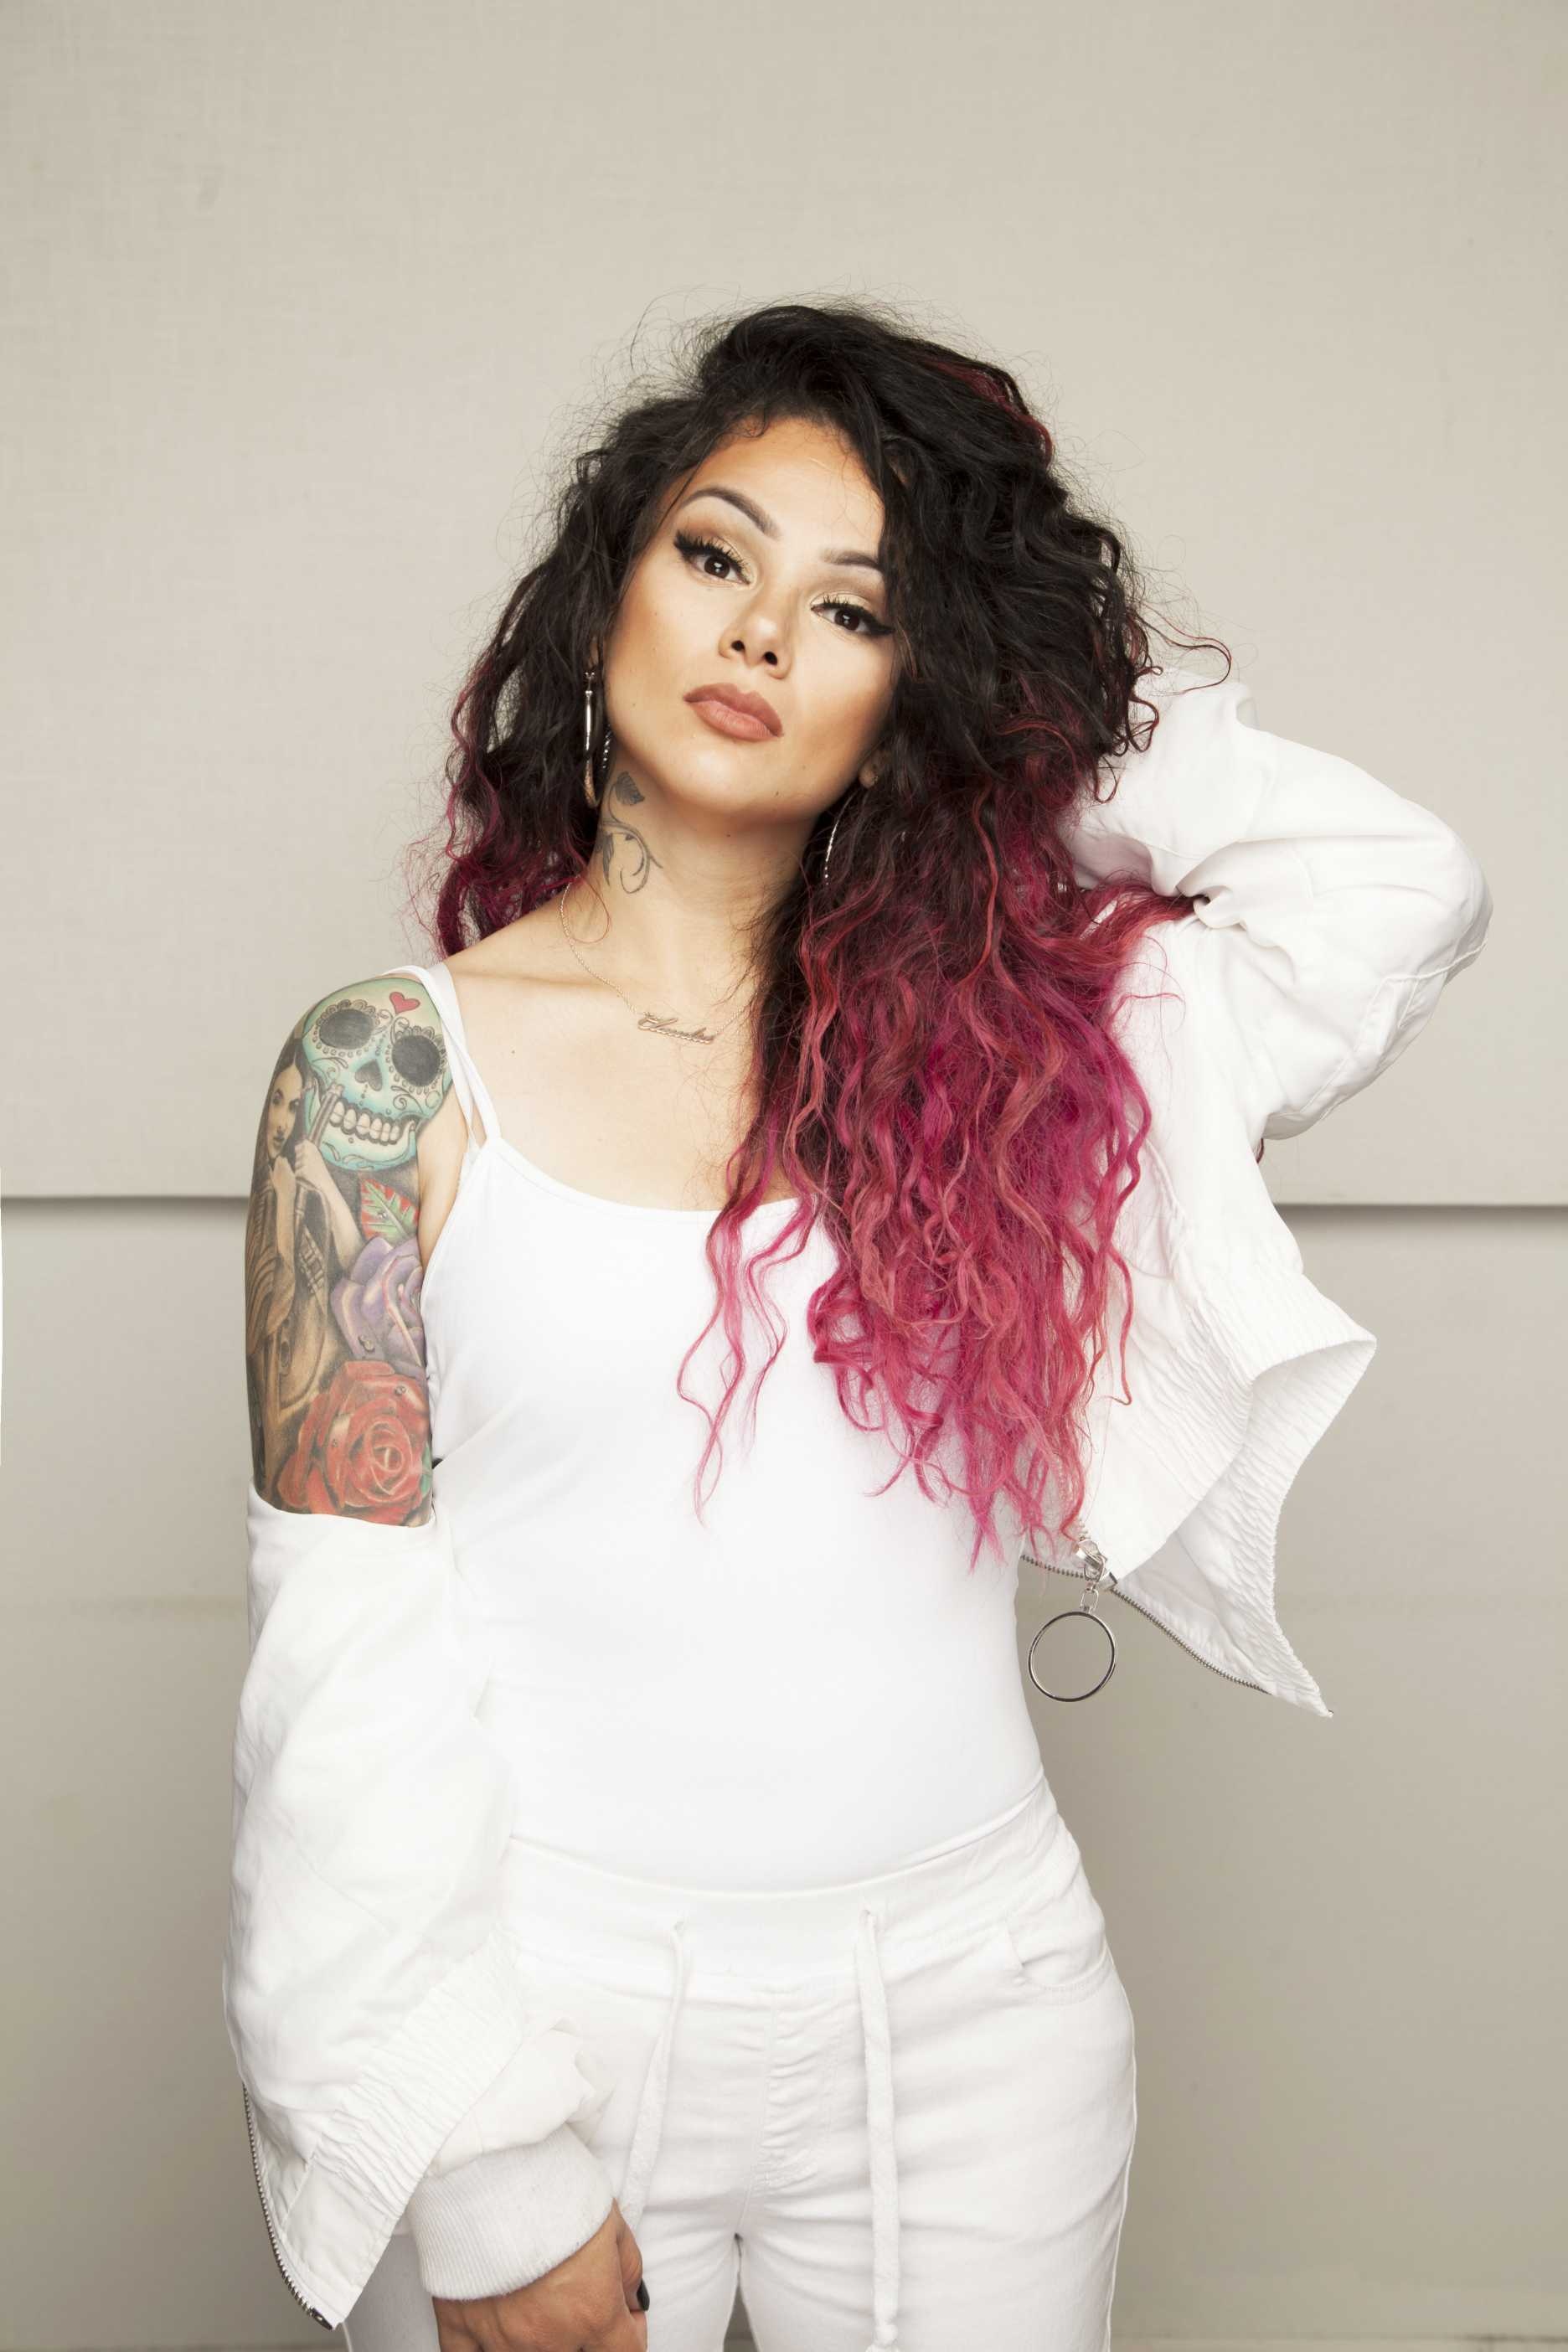 Snow Tha Product's pool party, Hollywood Times event, Energetic music, Party vibes, 1880x2810 HD Phone